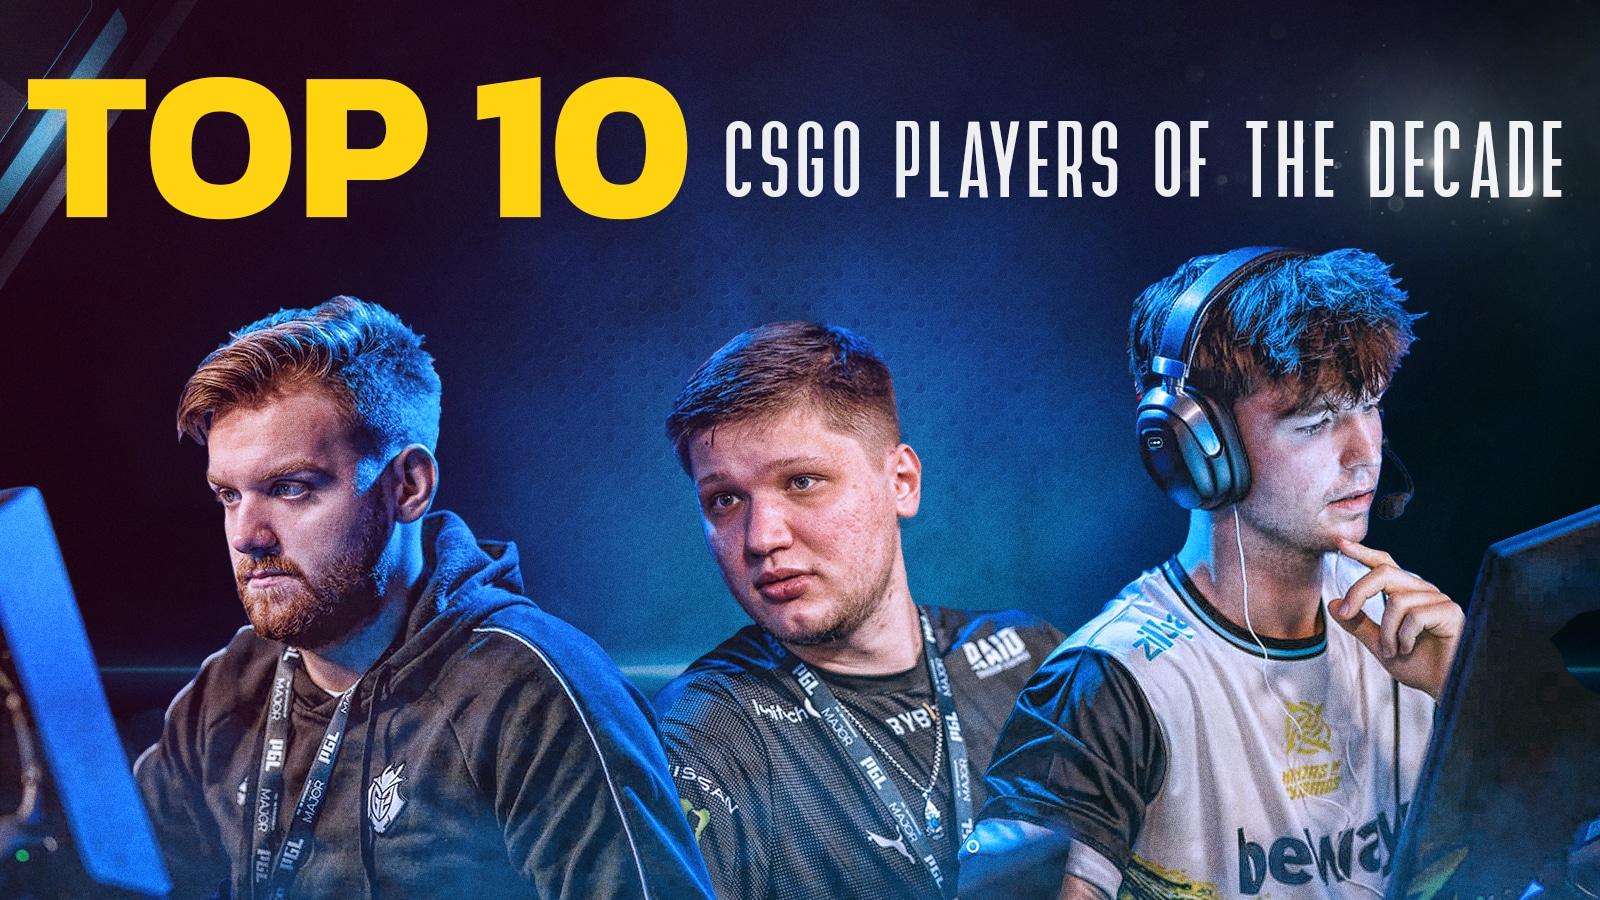 HLTV.org's Top 20 Players of 2014 